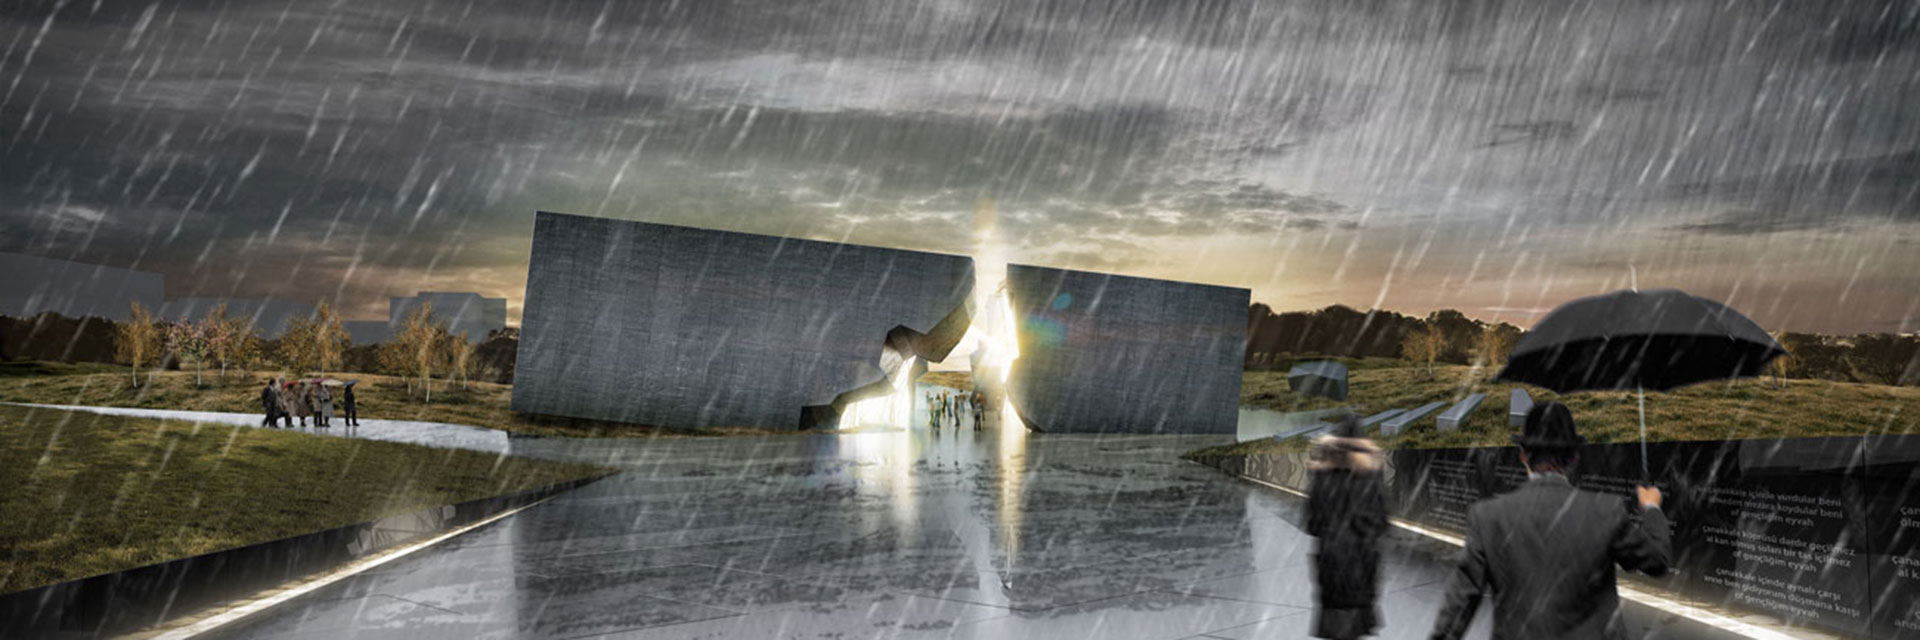 İpek Baycan Architects - Çanakkale War Research Center Competition Project (Honorable Mention Prize)